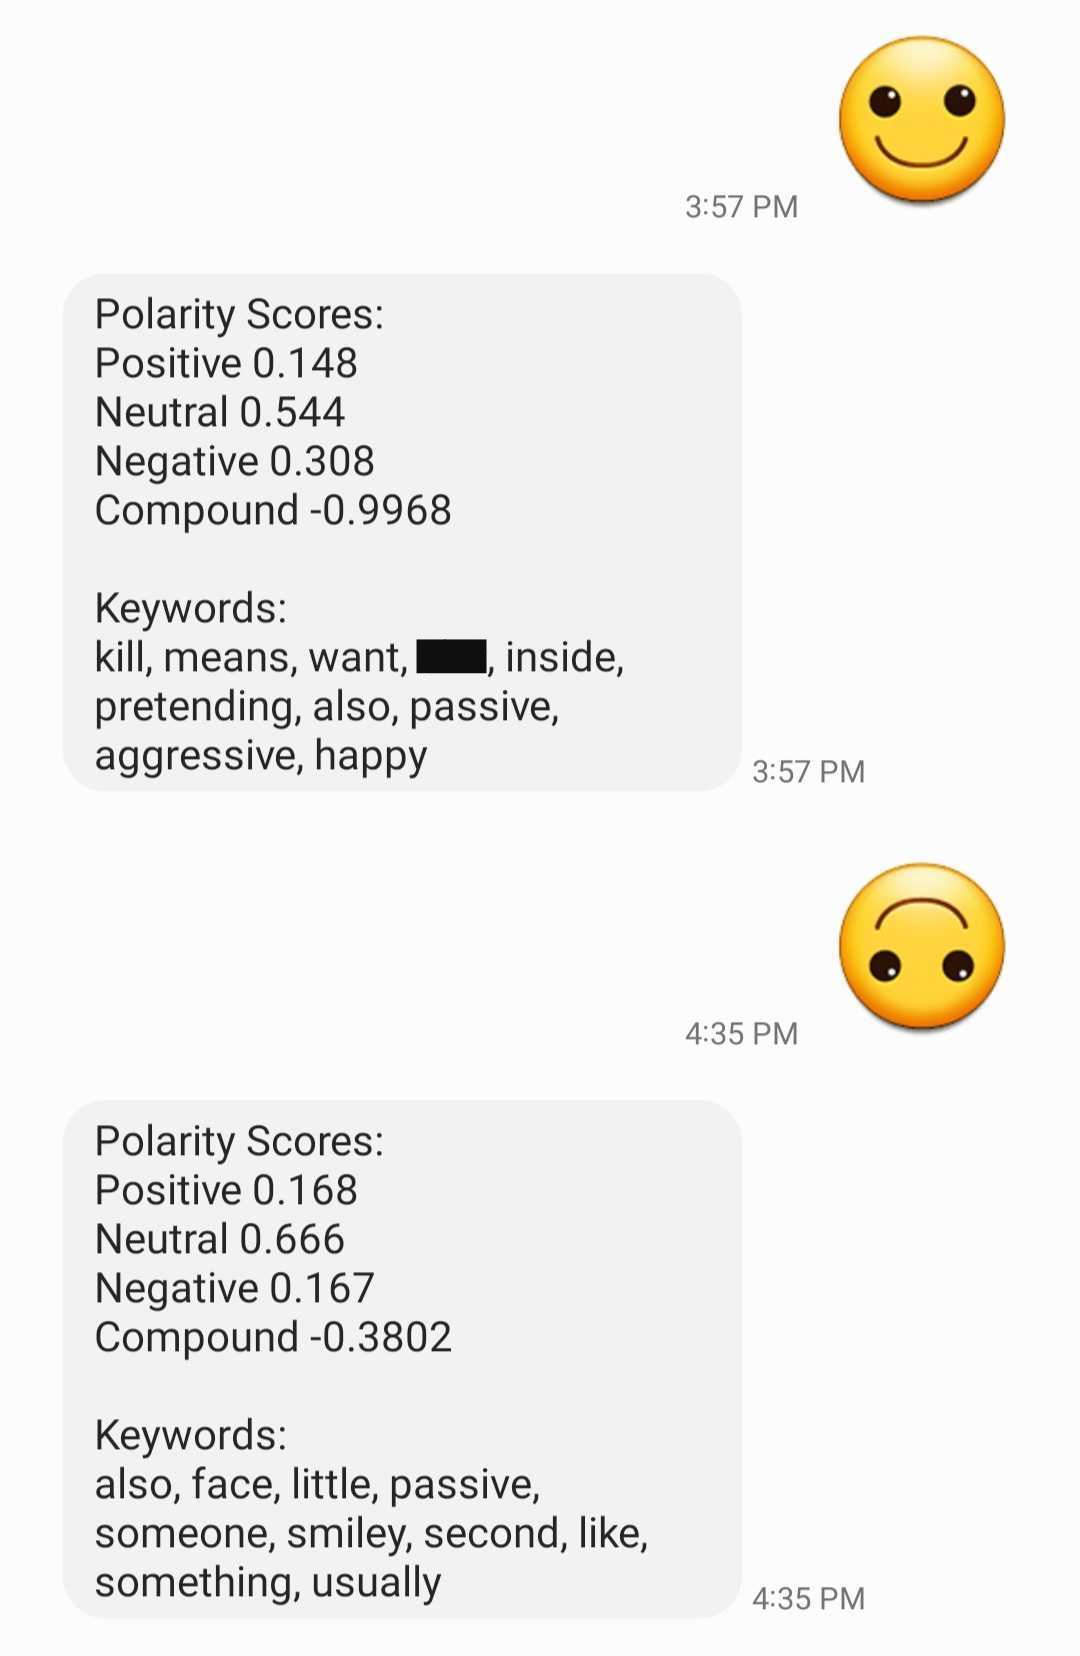 SMS conversation with one participant sending an emojis and the other responding with polarity scores and keywords calculated from the emoji.